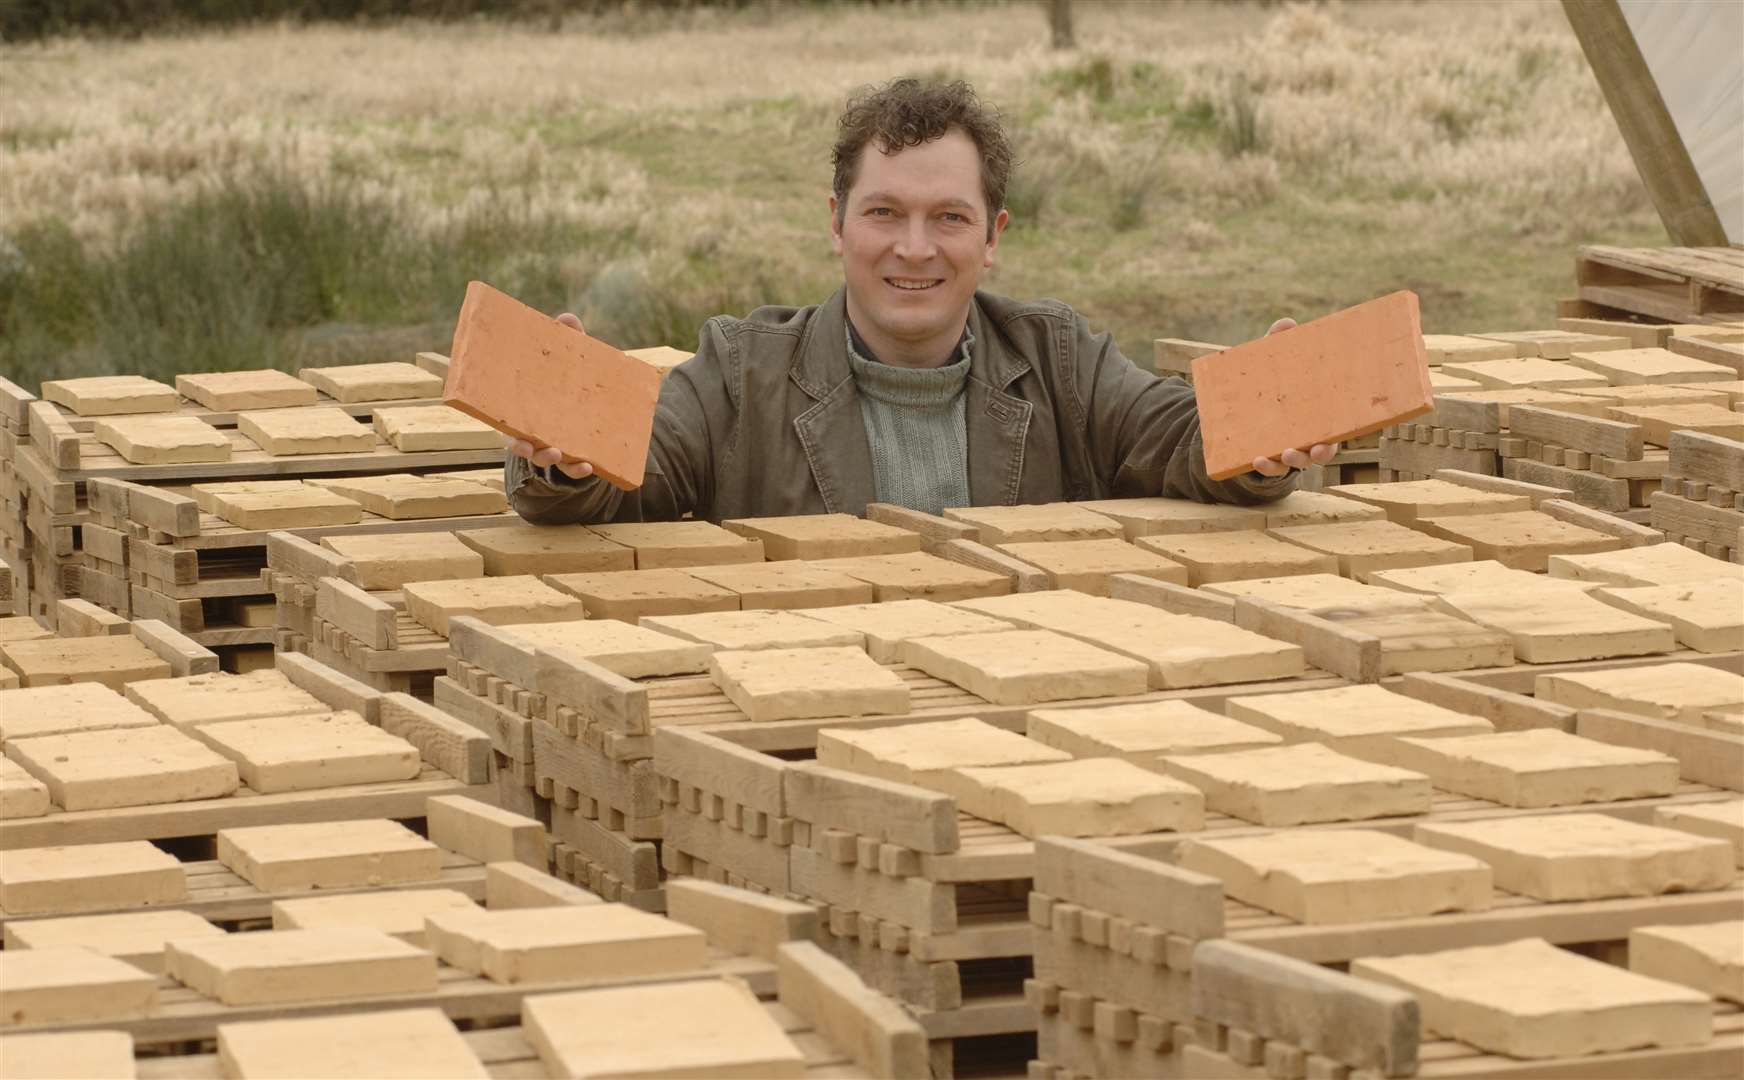 Richard Hawkes is pictured with some of the tiles that wer made for his environmentally friendly house